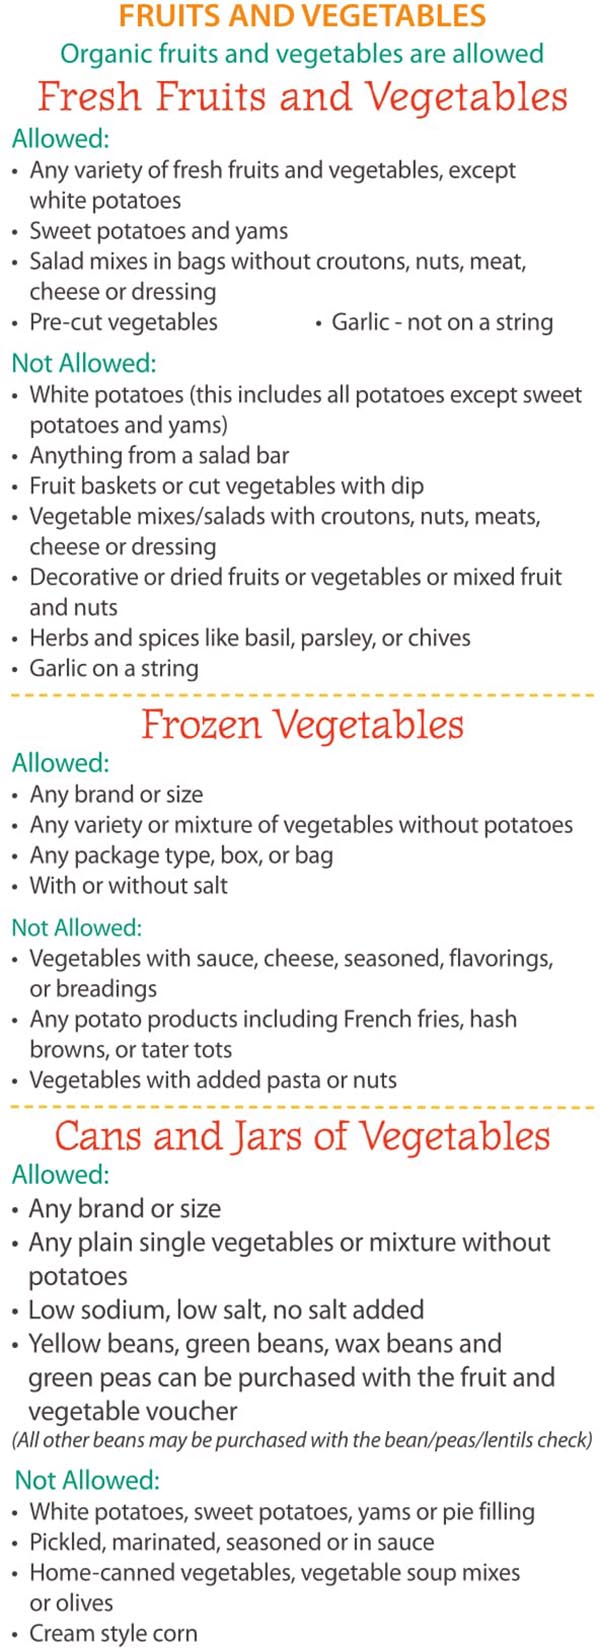 Maine WIC Food List Fruits and Vegetables